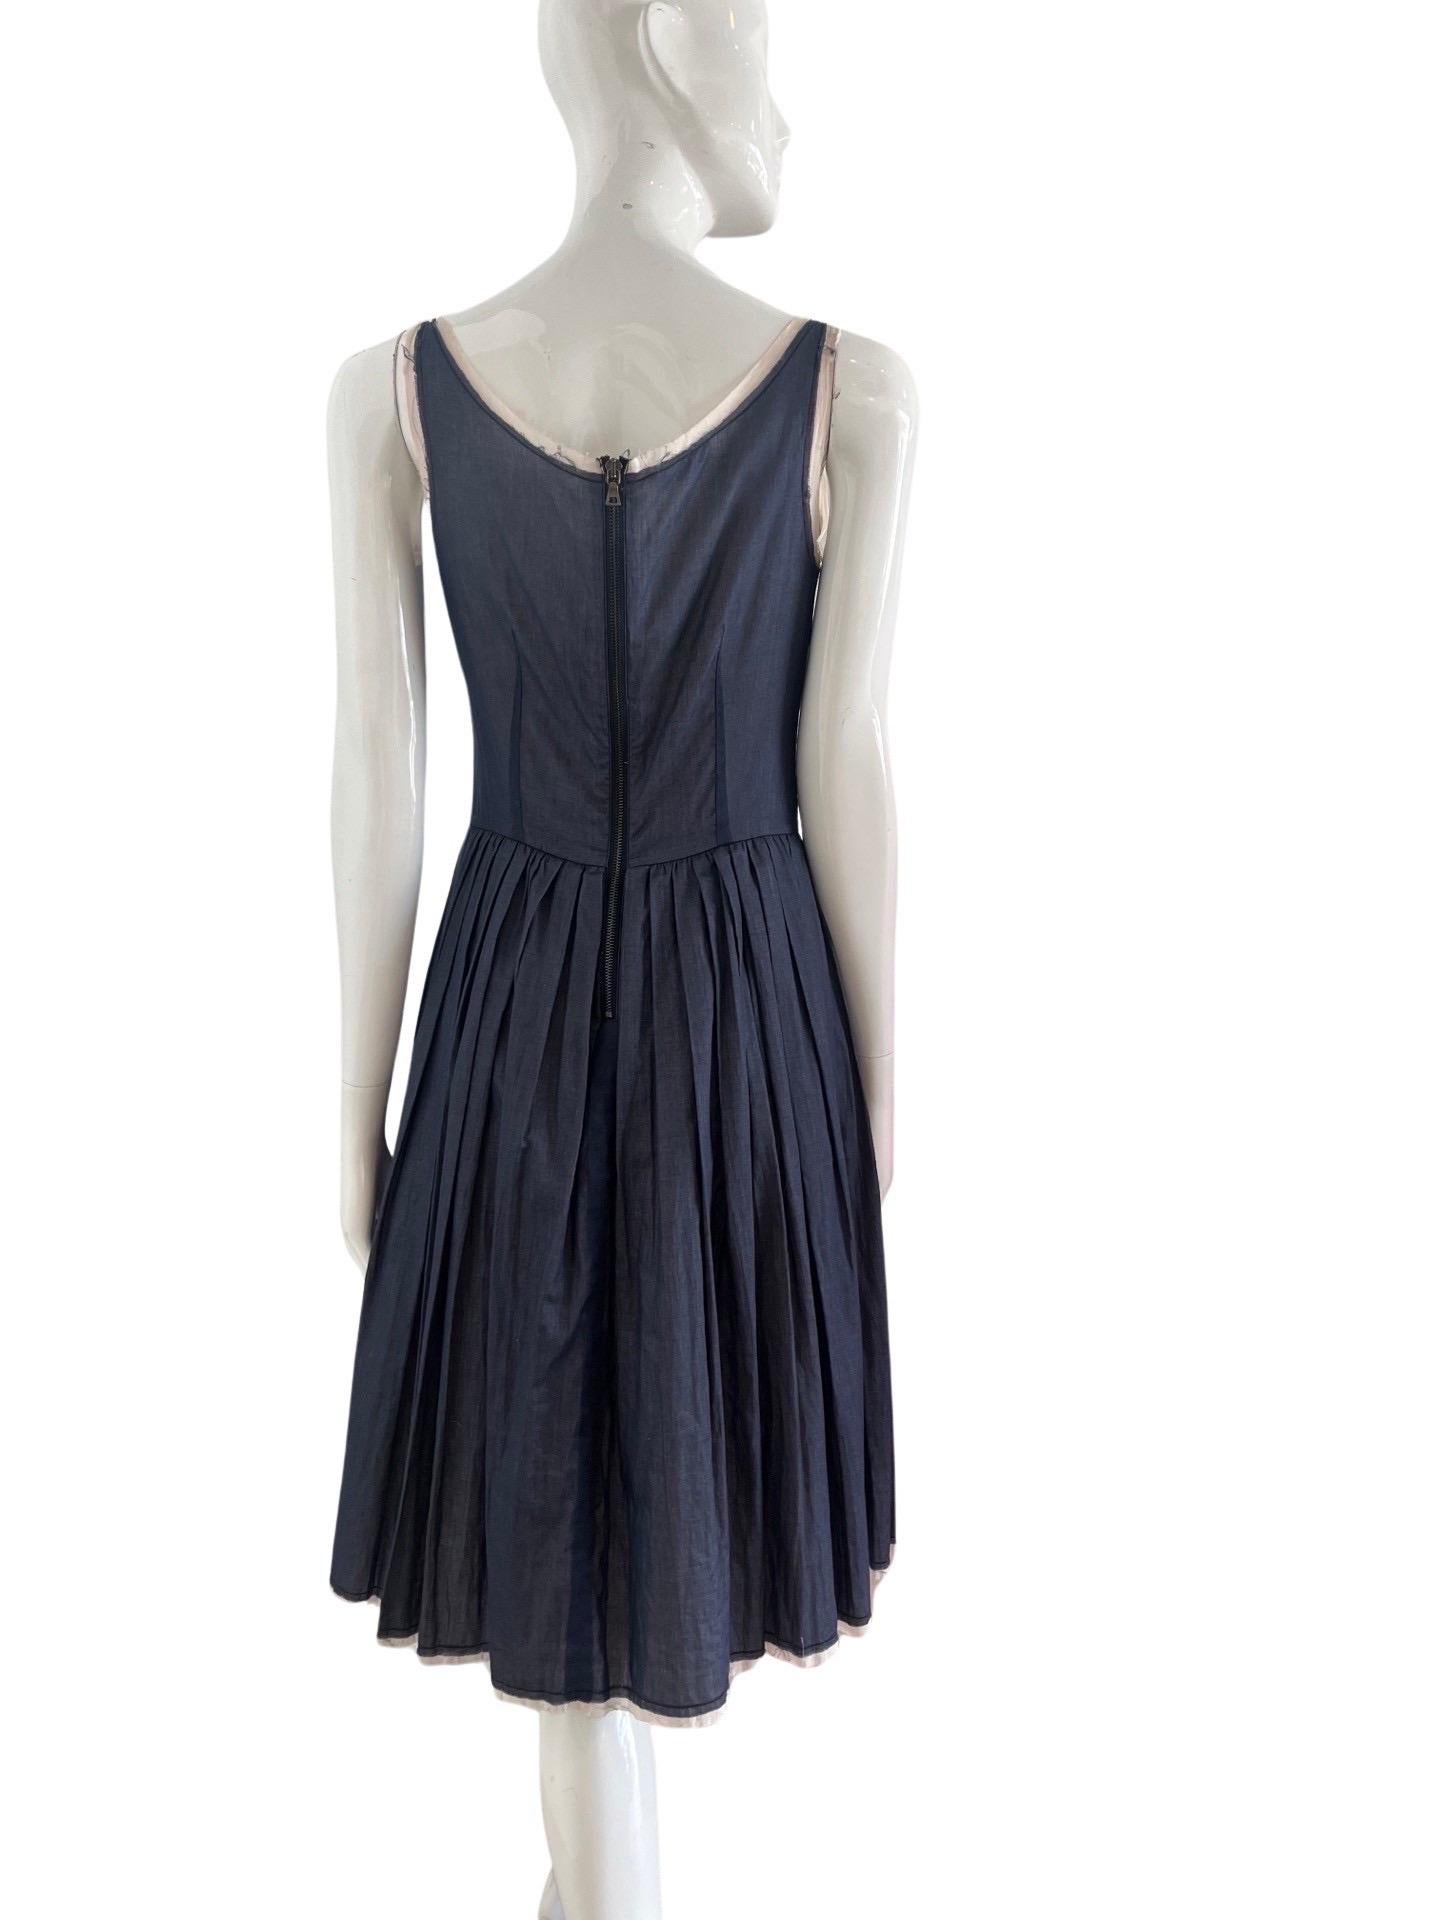 Prada Sport Chambray Pleated Dress For Sale 5